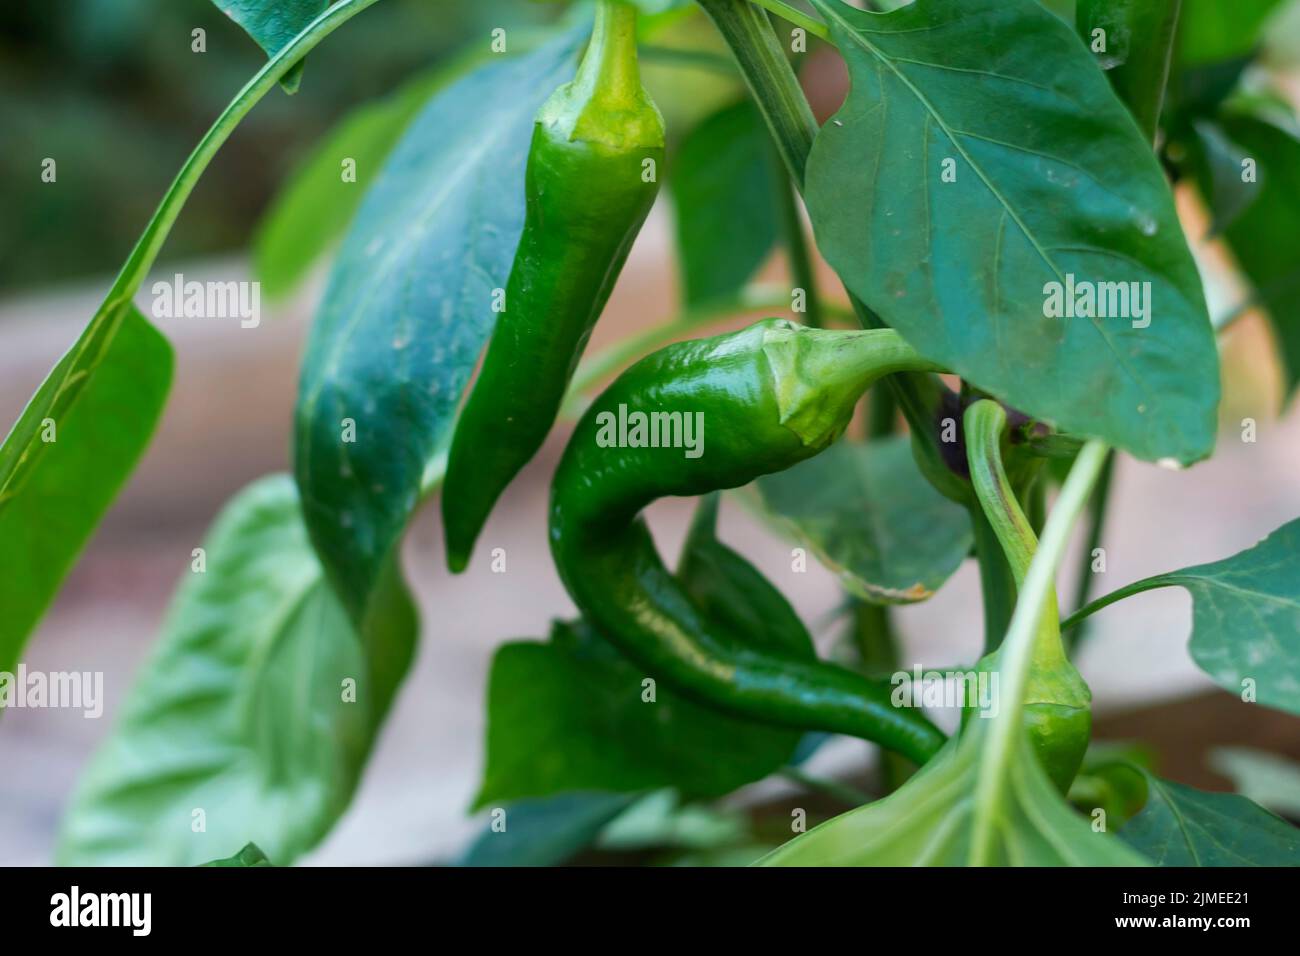 Hot chili peppers grow in a greenhouse. Green pods of hot pepper close up. Selective focus. Stock Photo